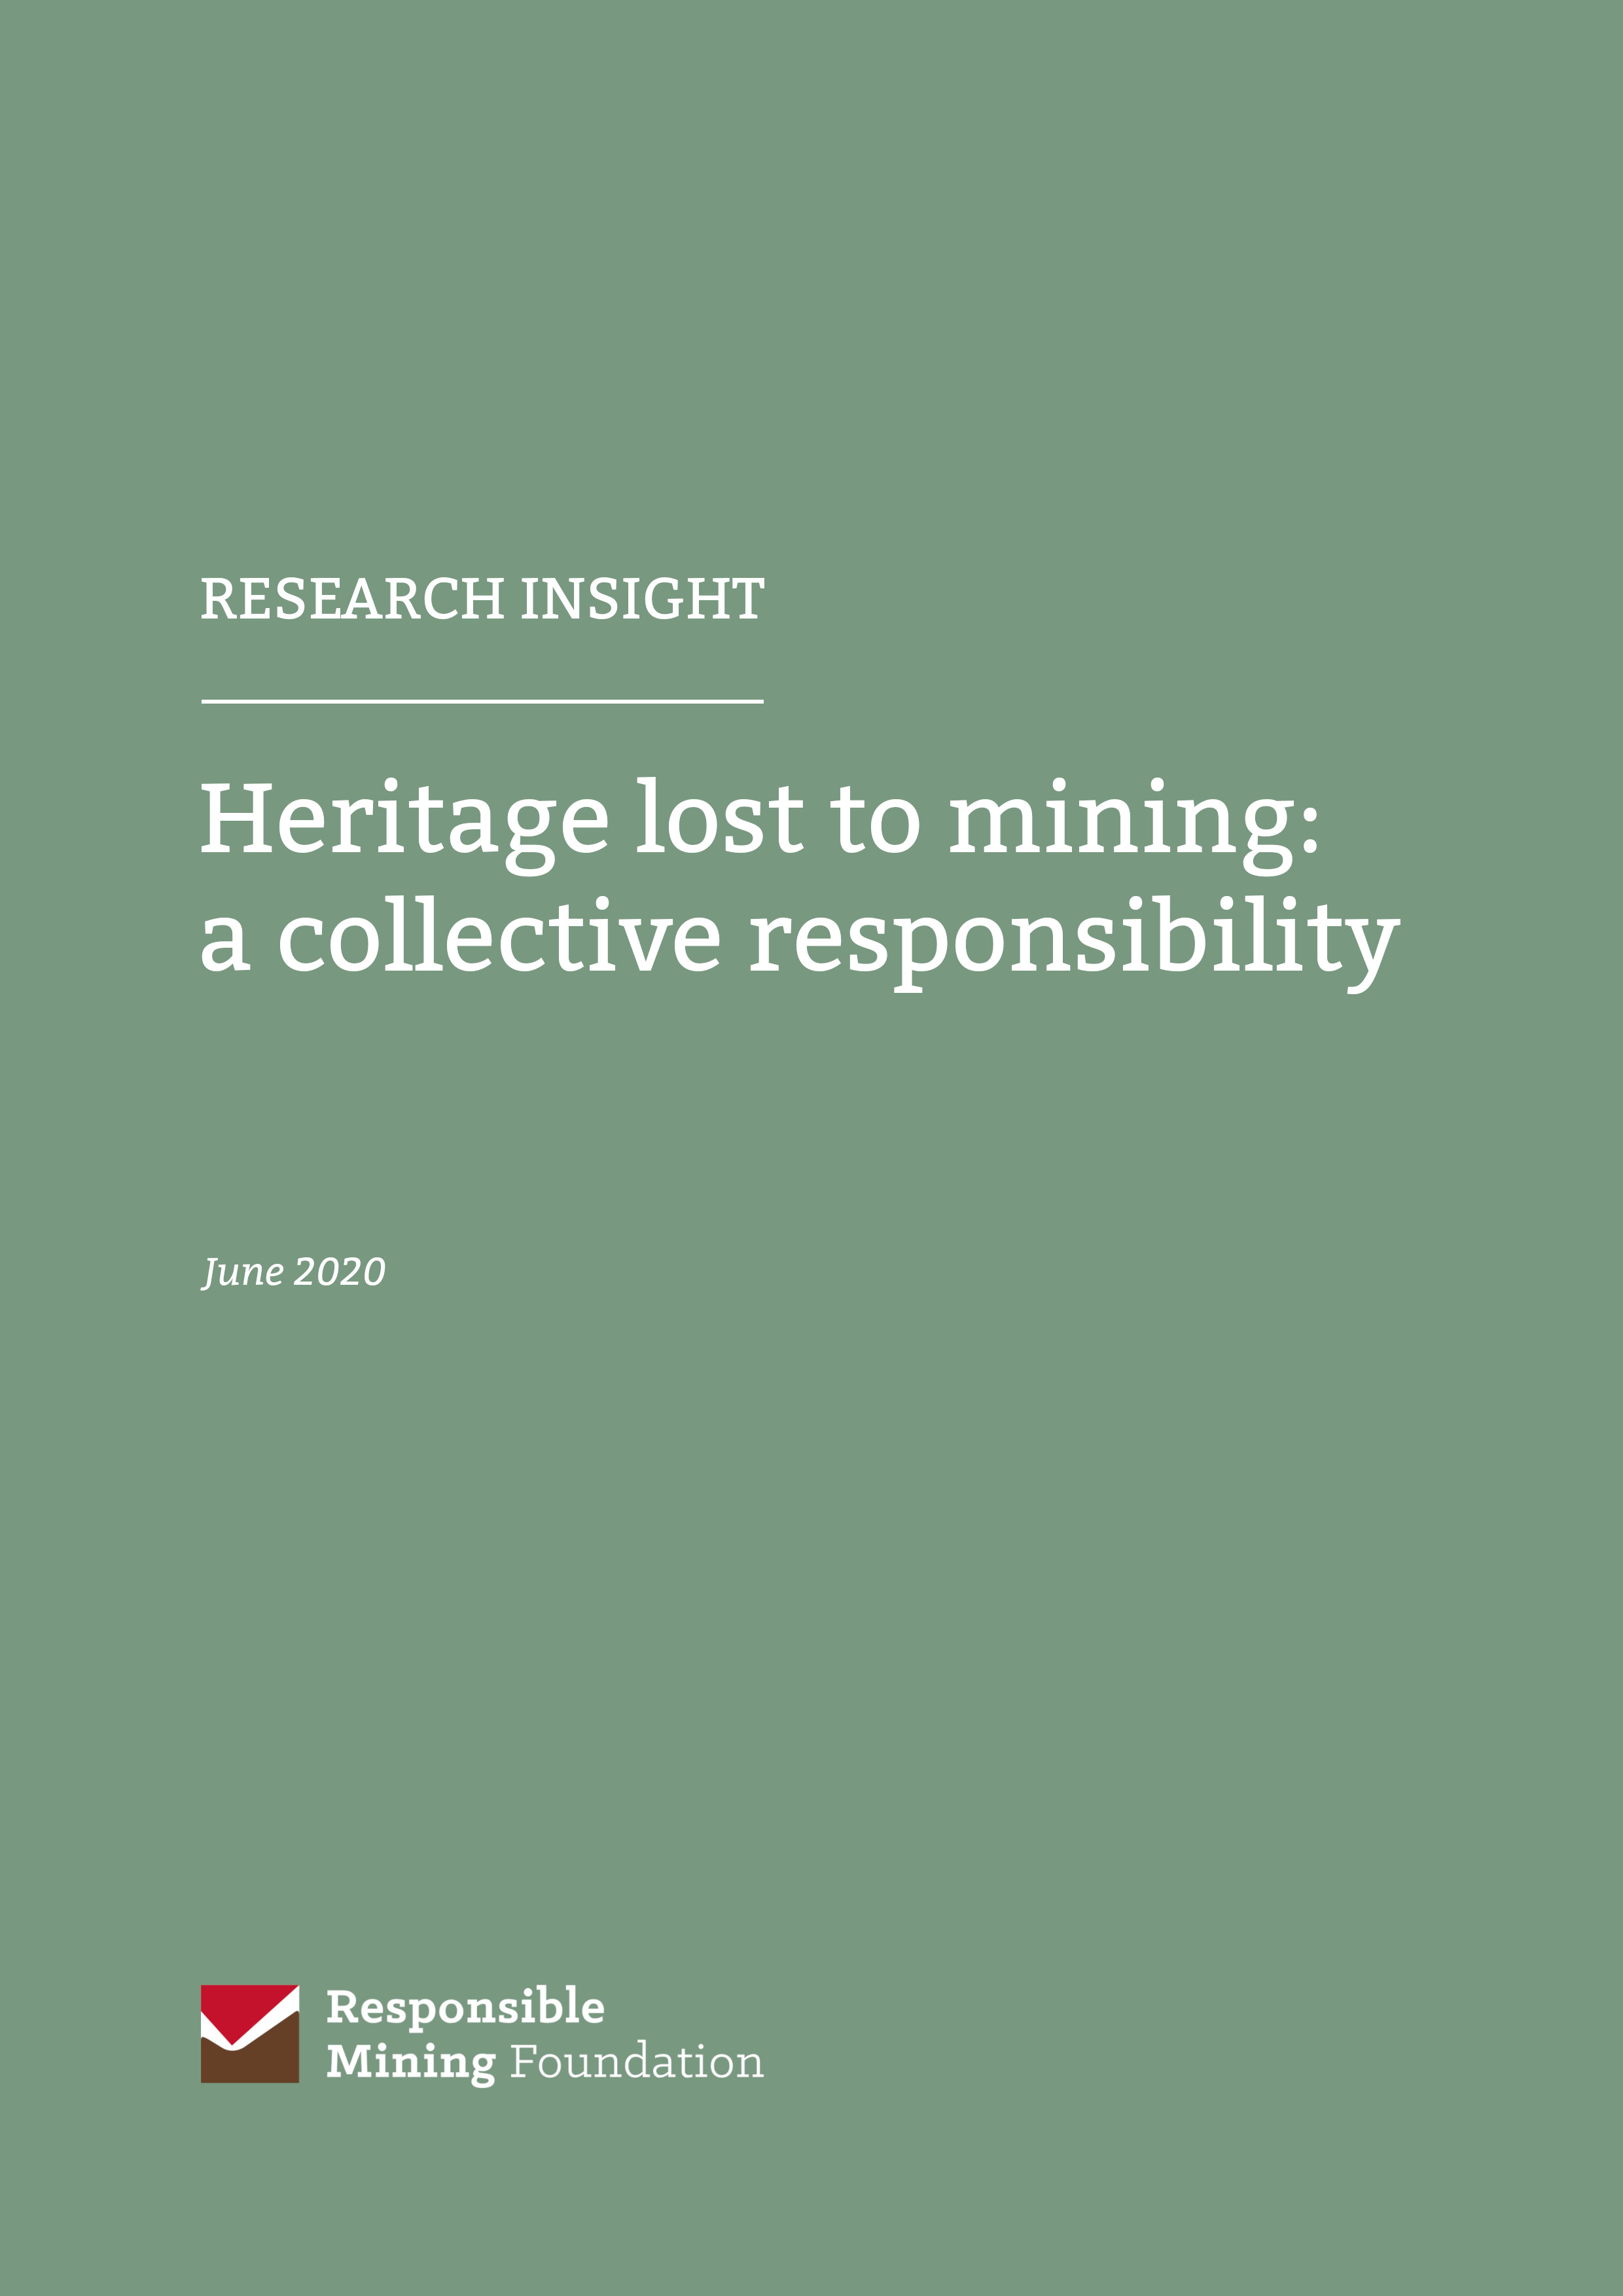 Research Insight